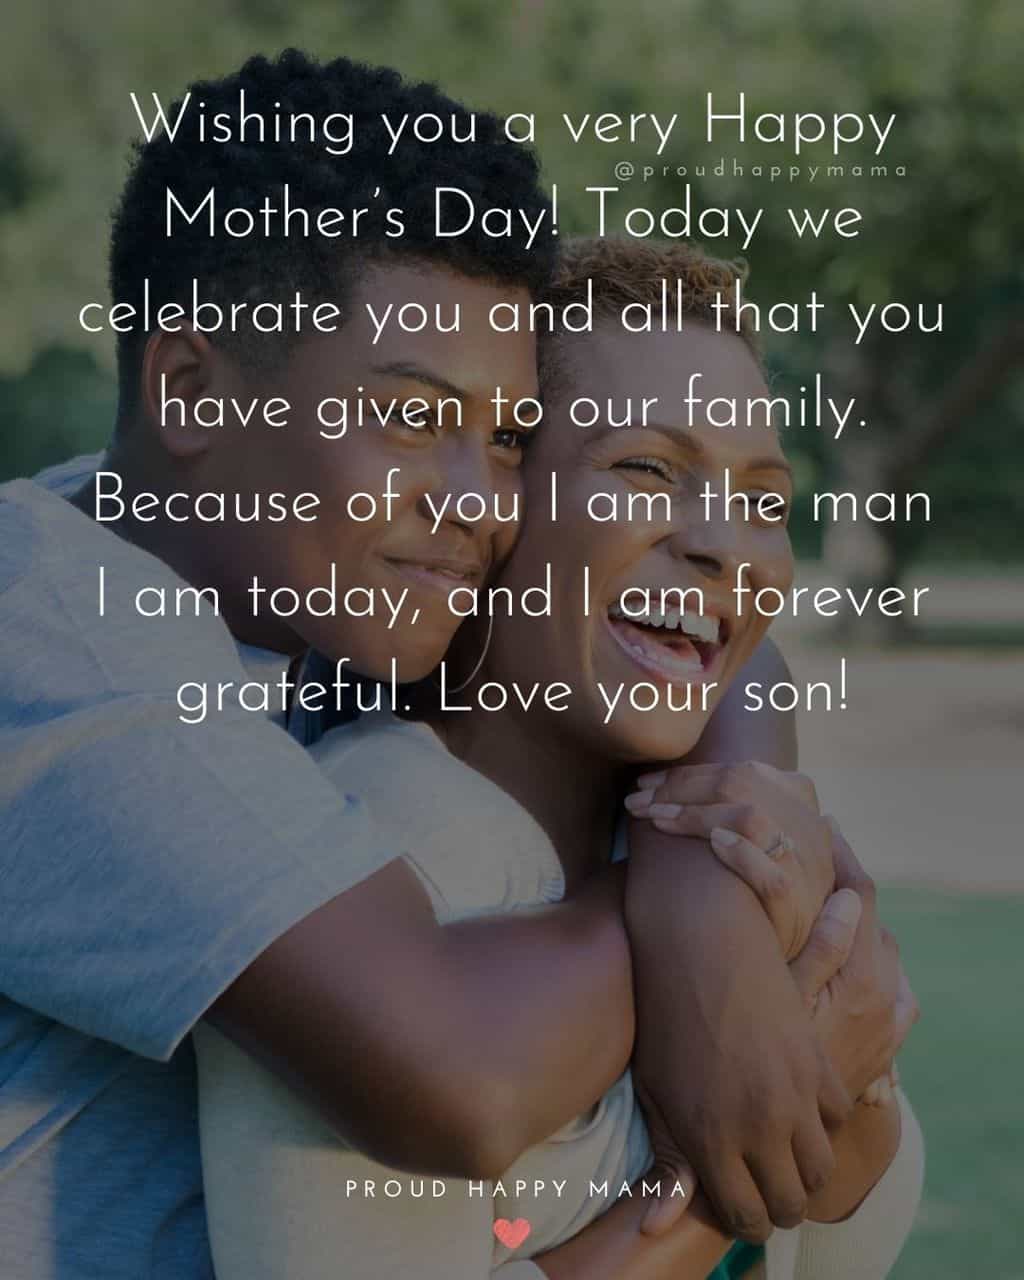 Happy Mothers Day Quotes From Son - Wishing you a very Happy Mother’s Day! Today we celebrate you and all that you